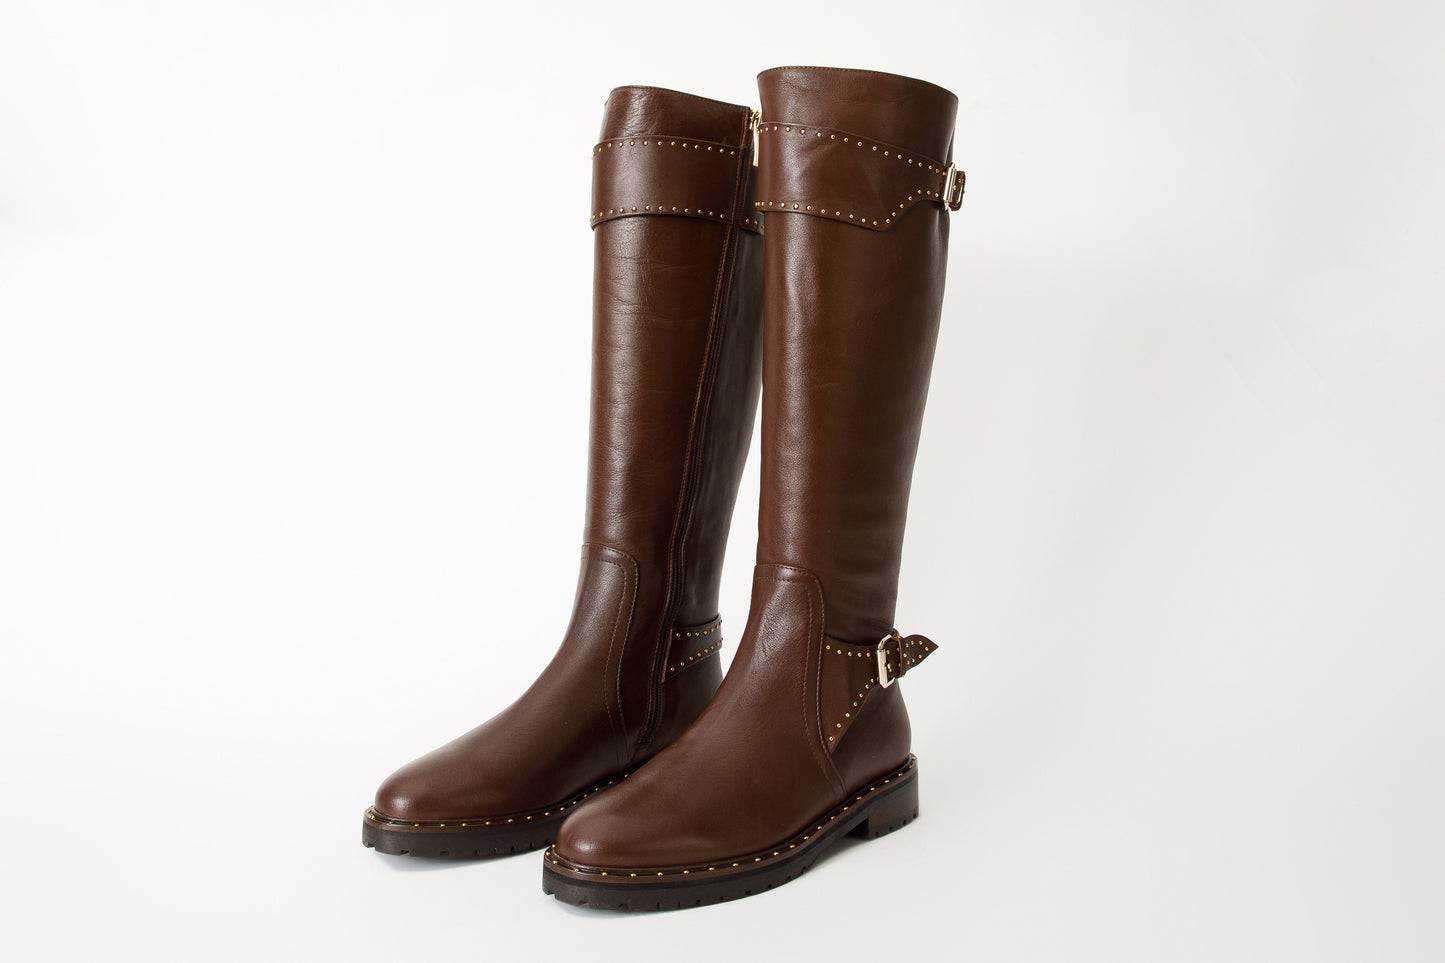 The Sariyer Brown Leather Knee High Women Boot